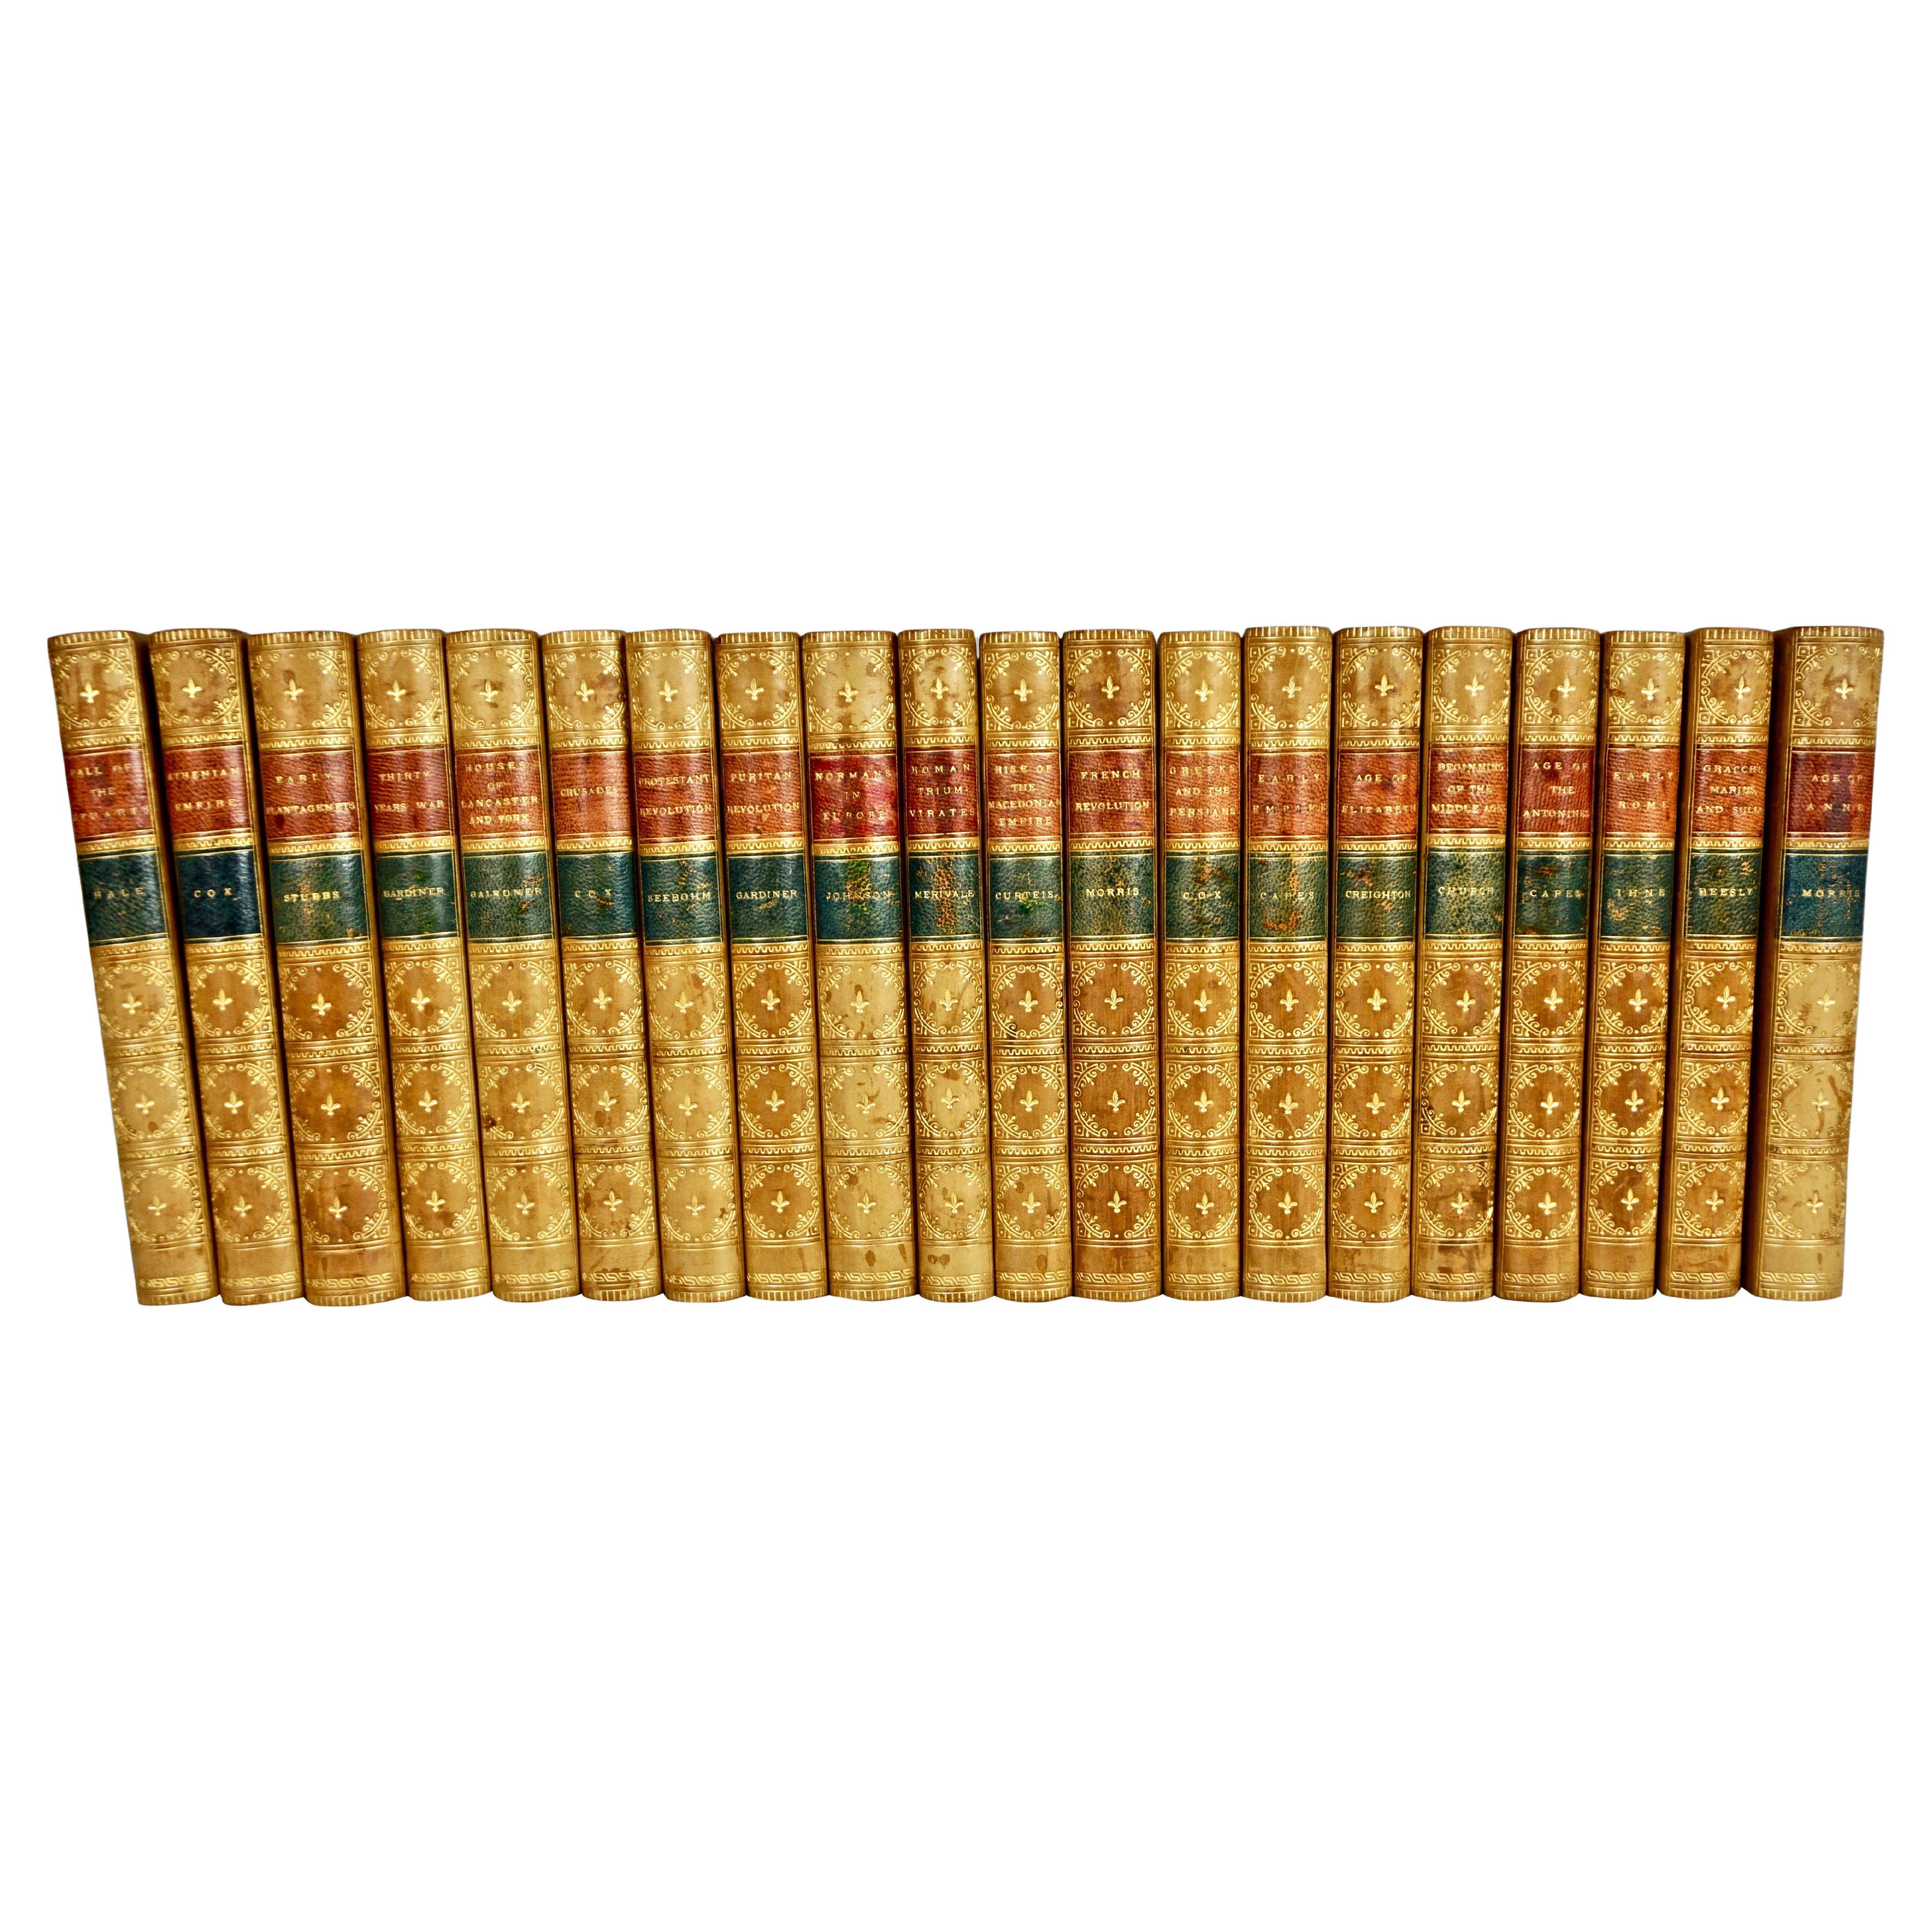 Epochs of Ancient History in 20 Volumes Bound in Tan Leather